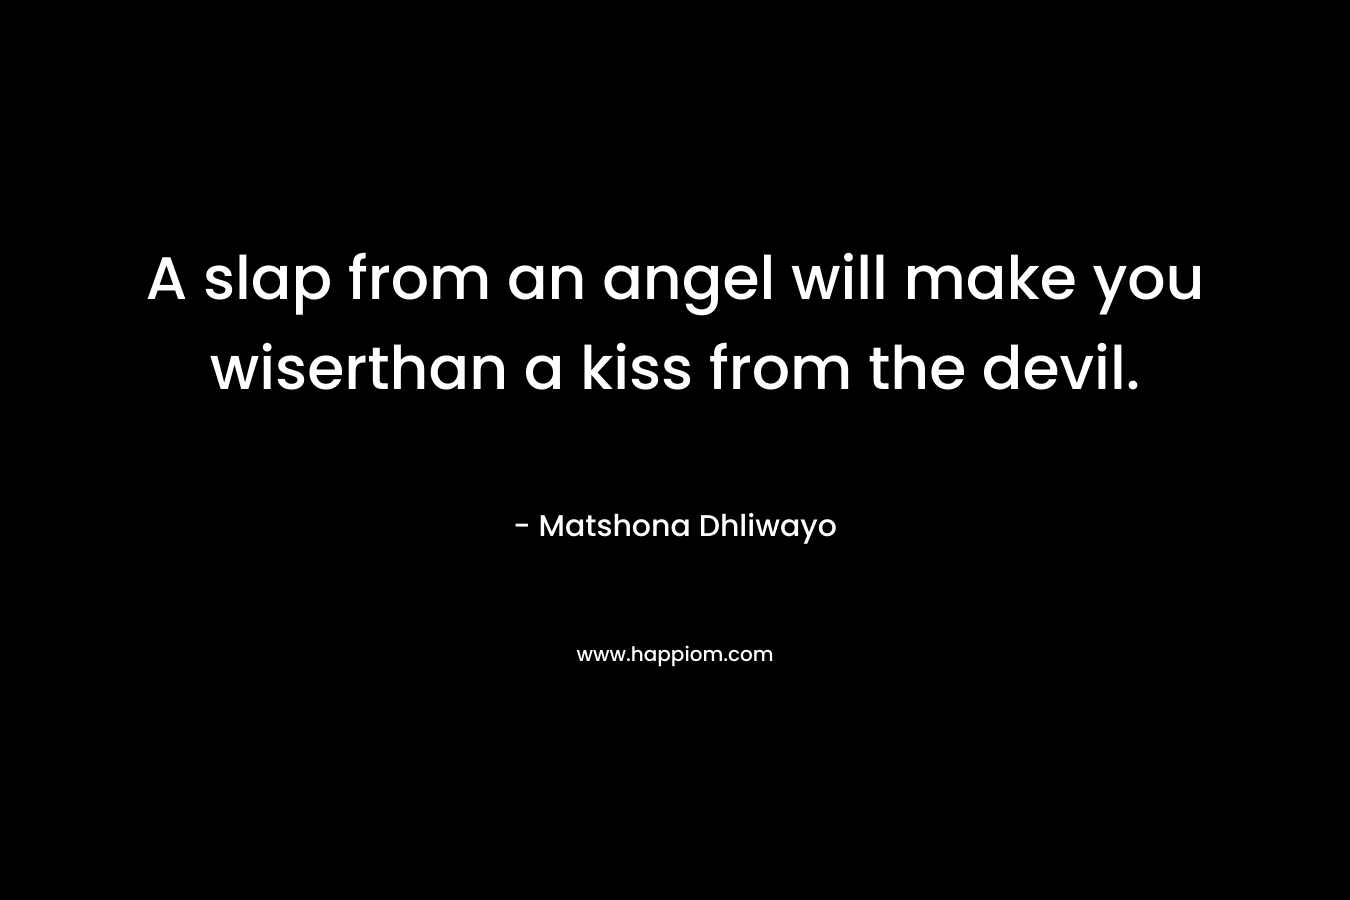 A slap from an angel will make you wiserthan a kiss from the devil. – Matshona Dhliwayo